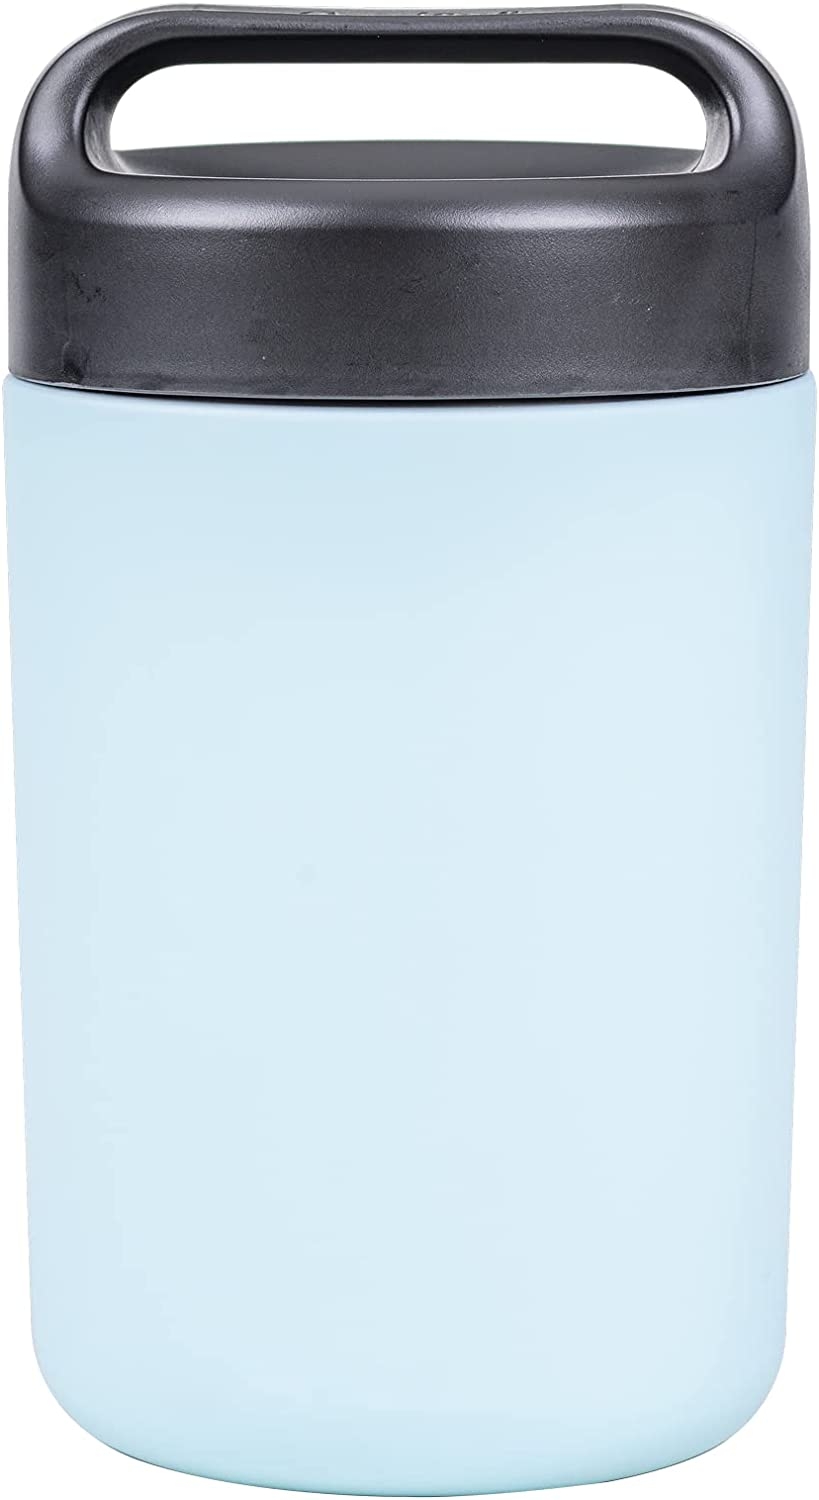 Goodful Vacuum Sealed Insulated Food Jar with Handle Lid, Stainless Steel Thermos, Lunch Container, 16 Oz, Gray Import To Shop